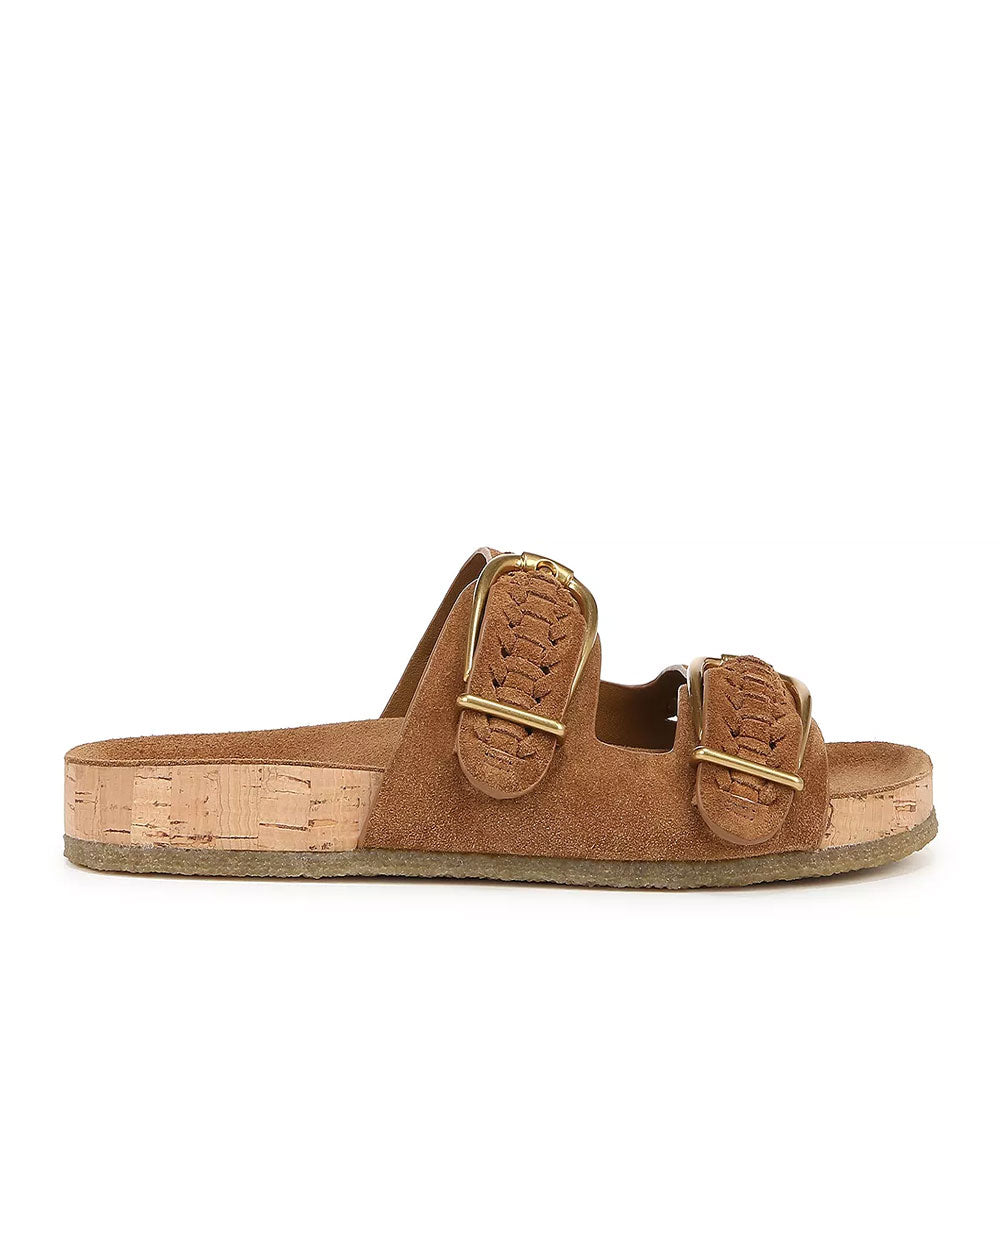 Paige Sandals in Hazelwood